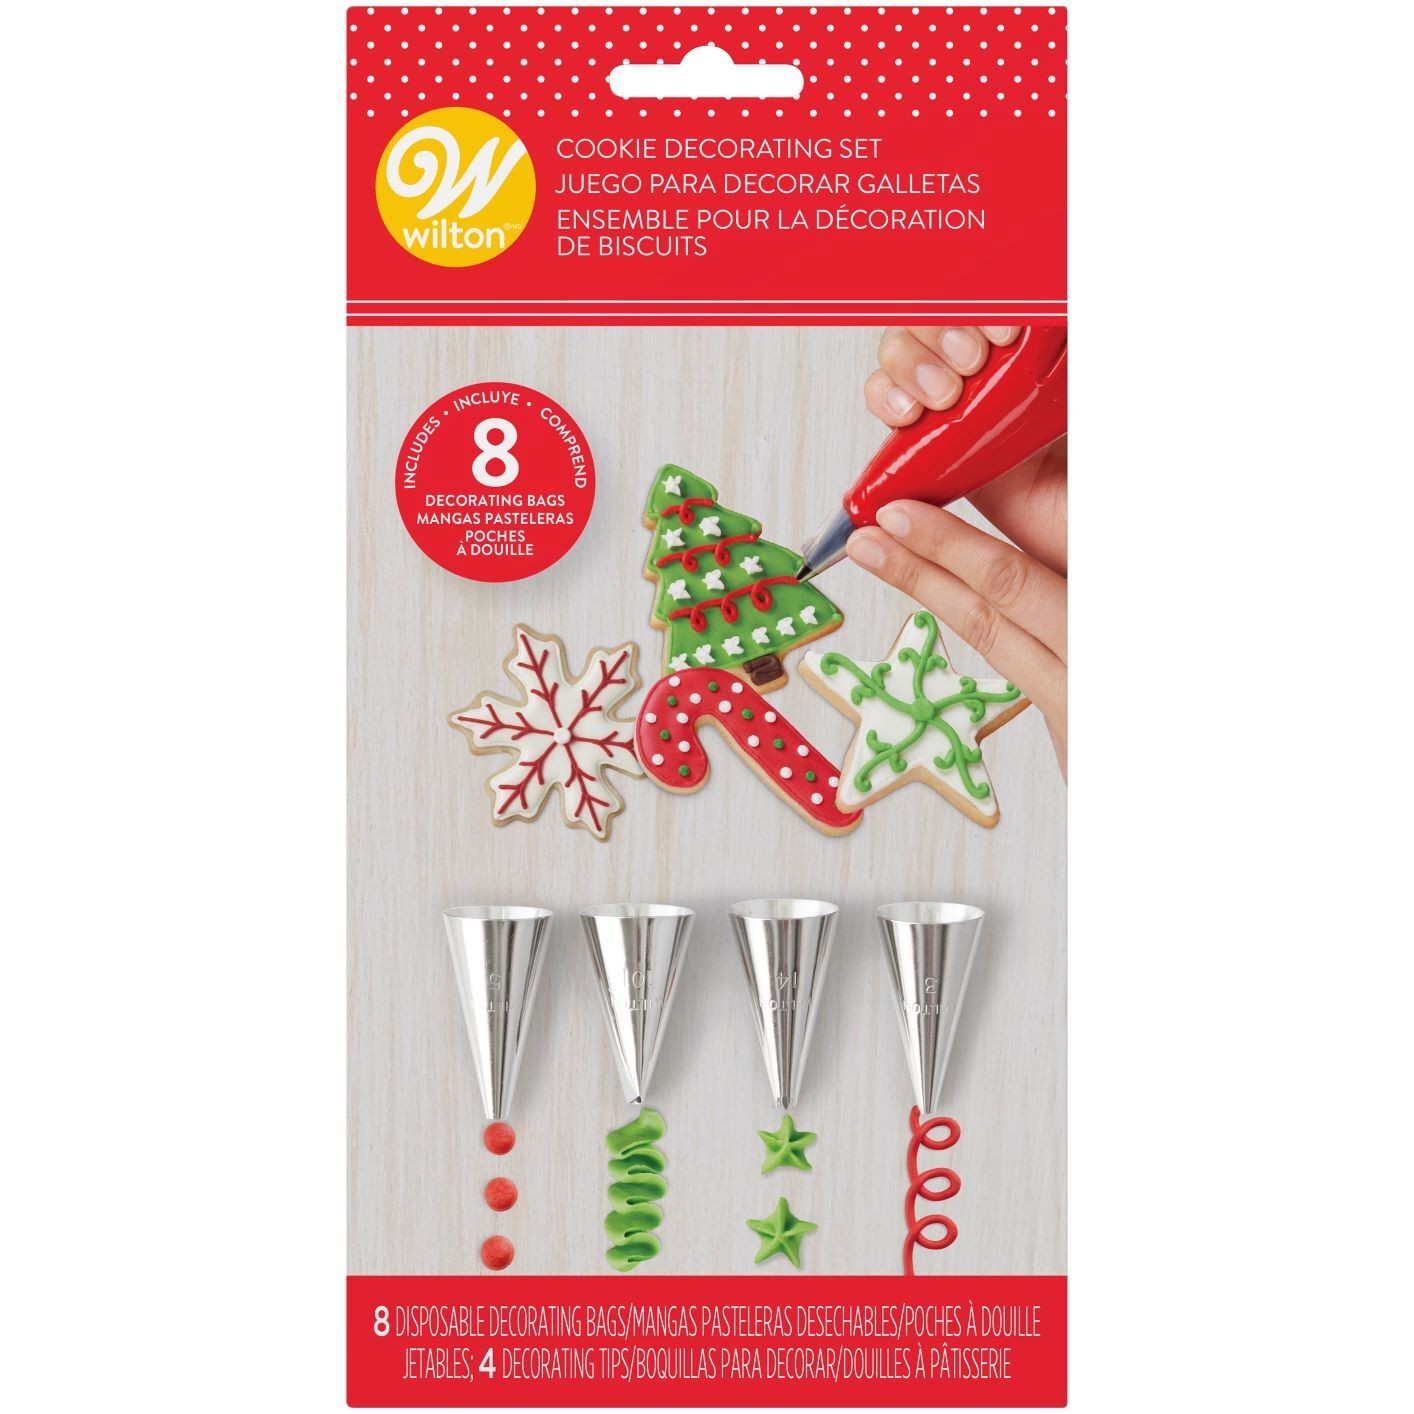 Cookie decorating piping bags and icing nozzle tip set by Wilton